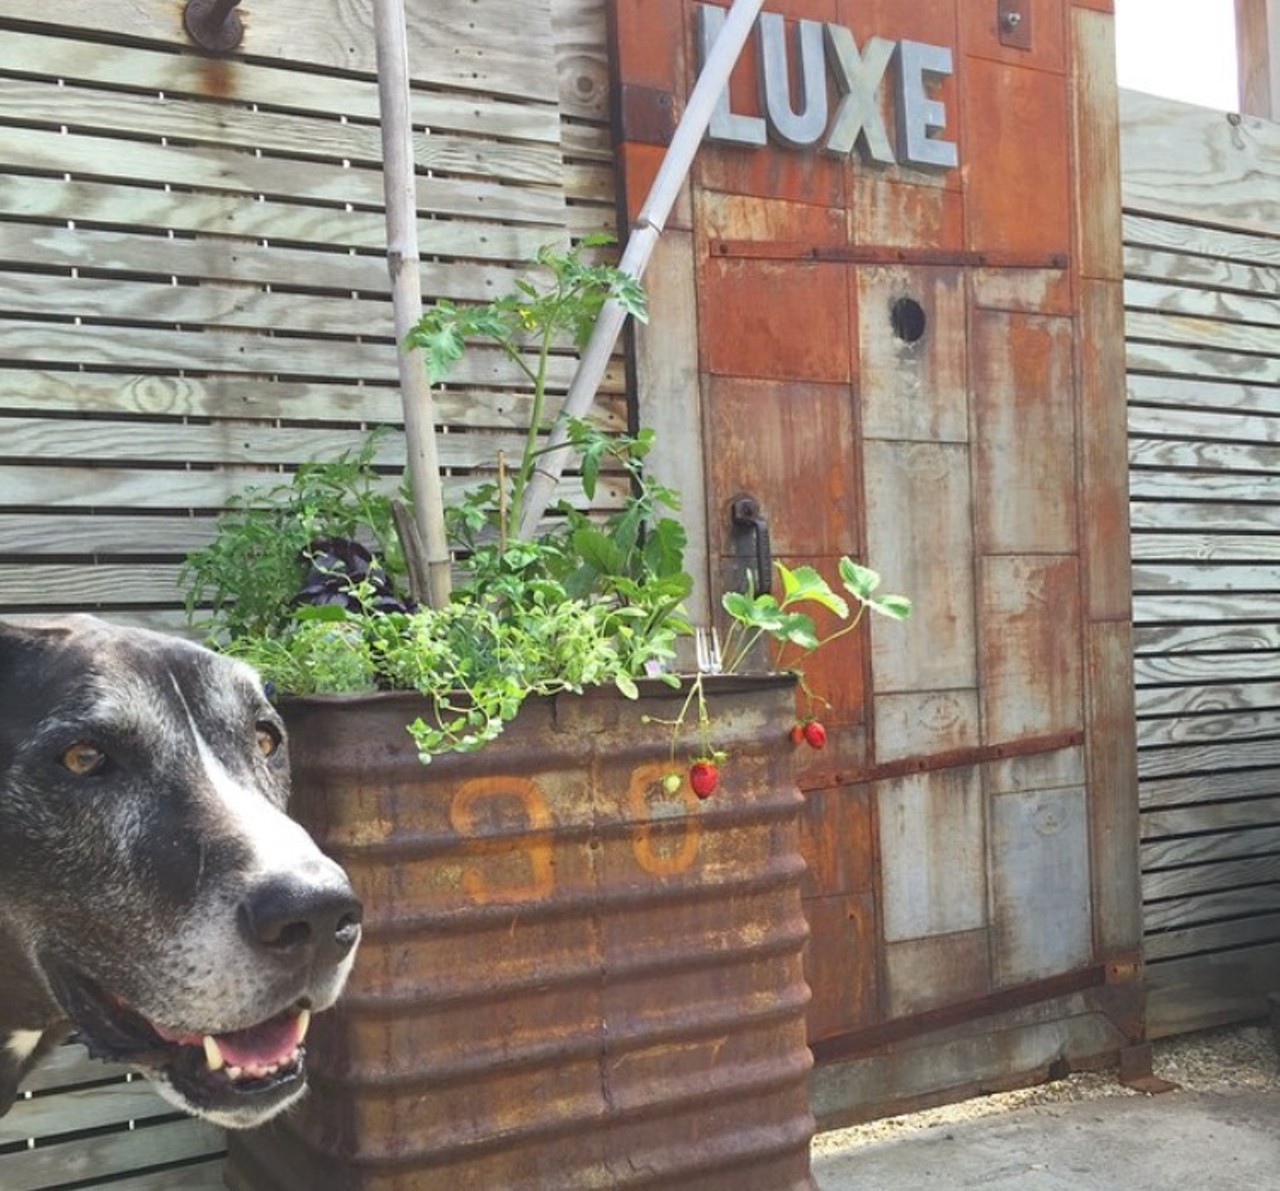 Luxe Kitchen & Lounge
6605 Detroit Ave
This dog friendly joint is known for its patio. During patio season, make sure to bring your K9 bud around on Sundays from 1 &#150; 3 p.m. for Bow Wow Brunch, where dogs can win some cool prizes and chow down the on doggie menu. 
(Photo courtesy of Instagram user: @Luxecle) 